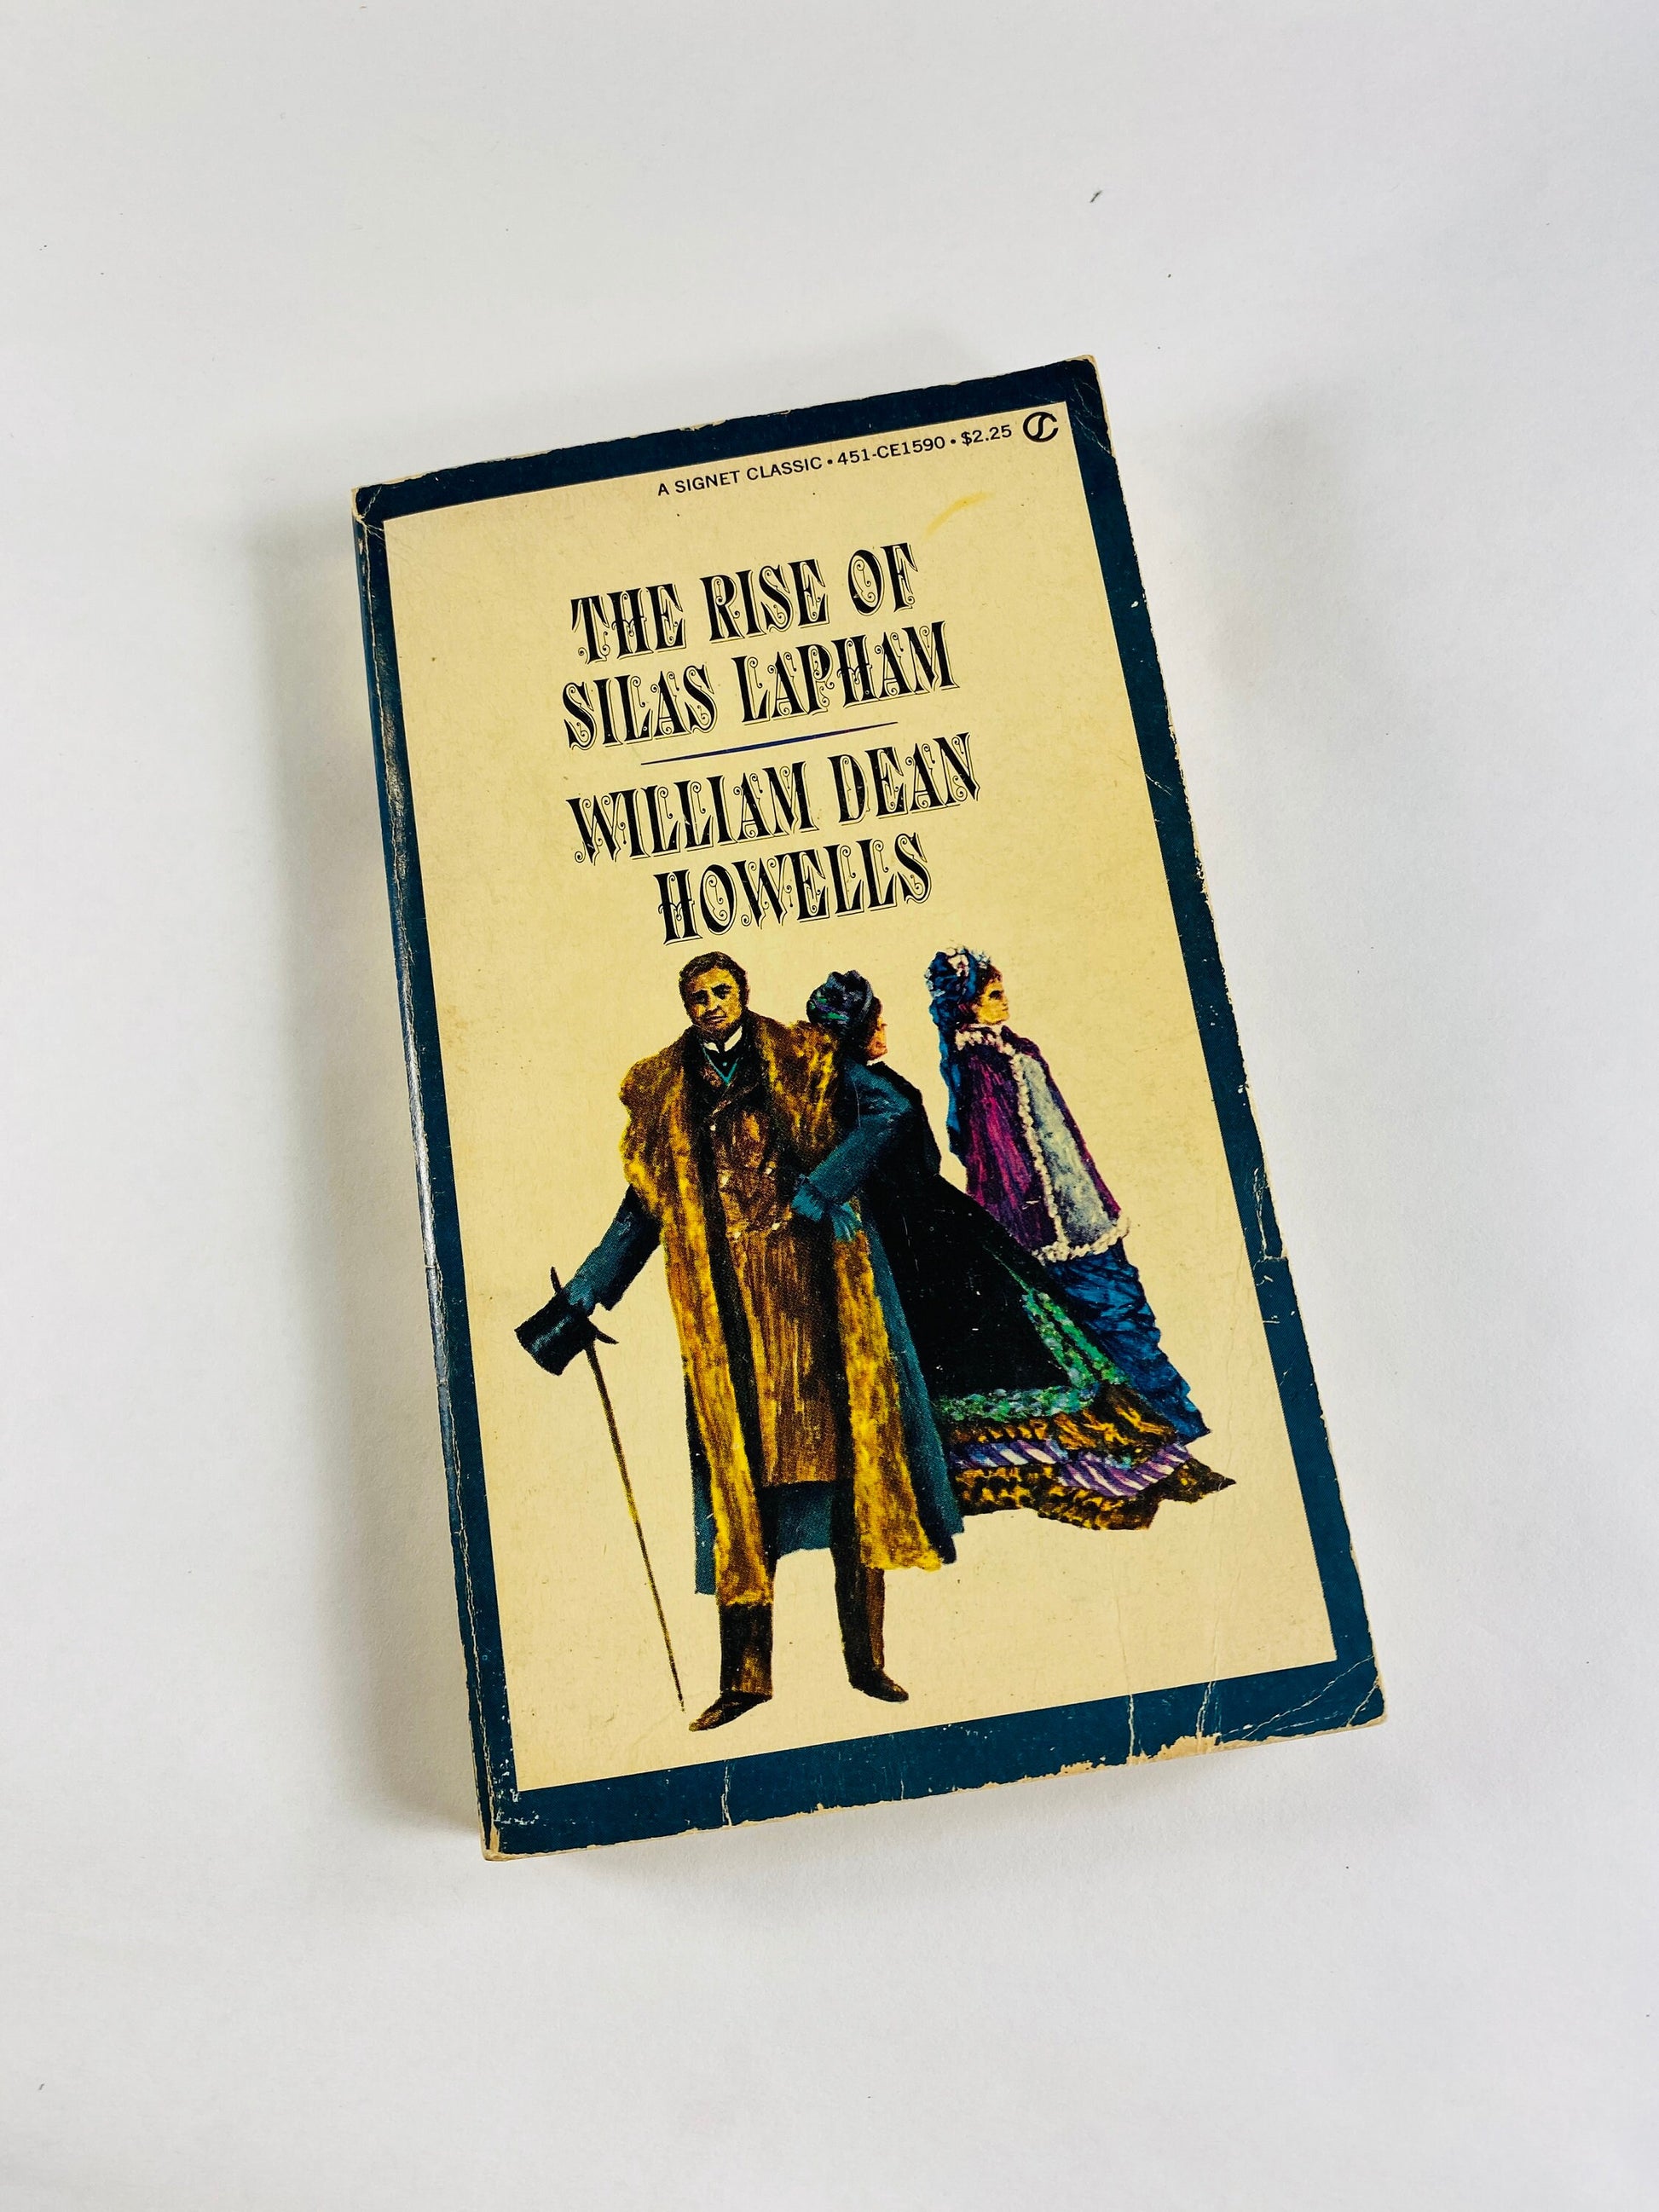 Rise of Silas Lapham by William Howells Vintage Signet paperback book about a self-made millionaire in Boston during the Gilded Age